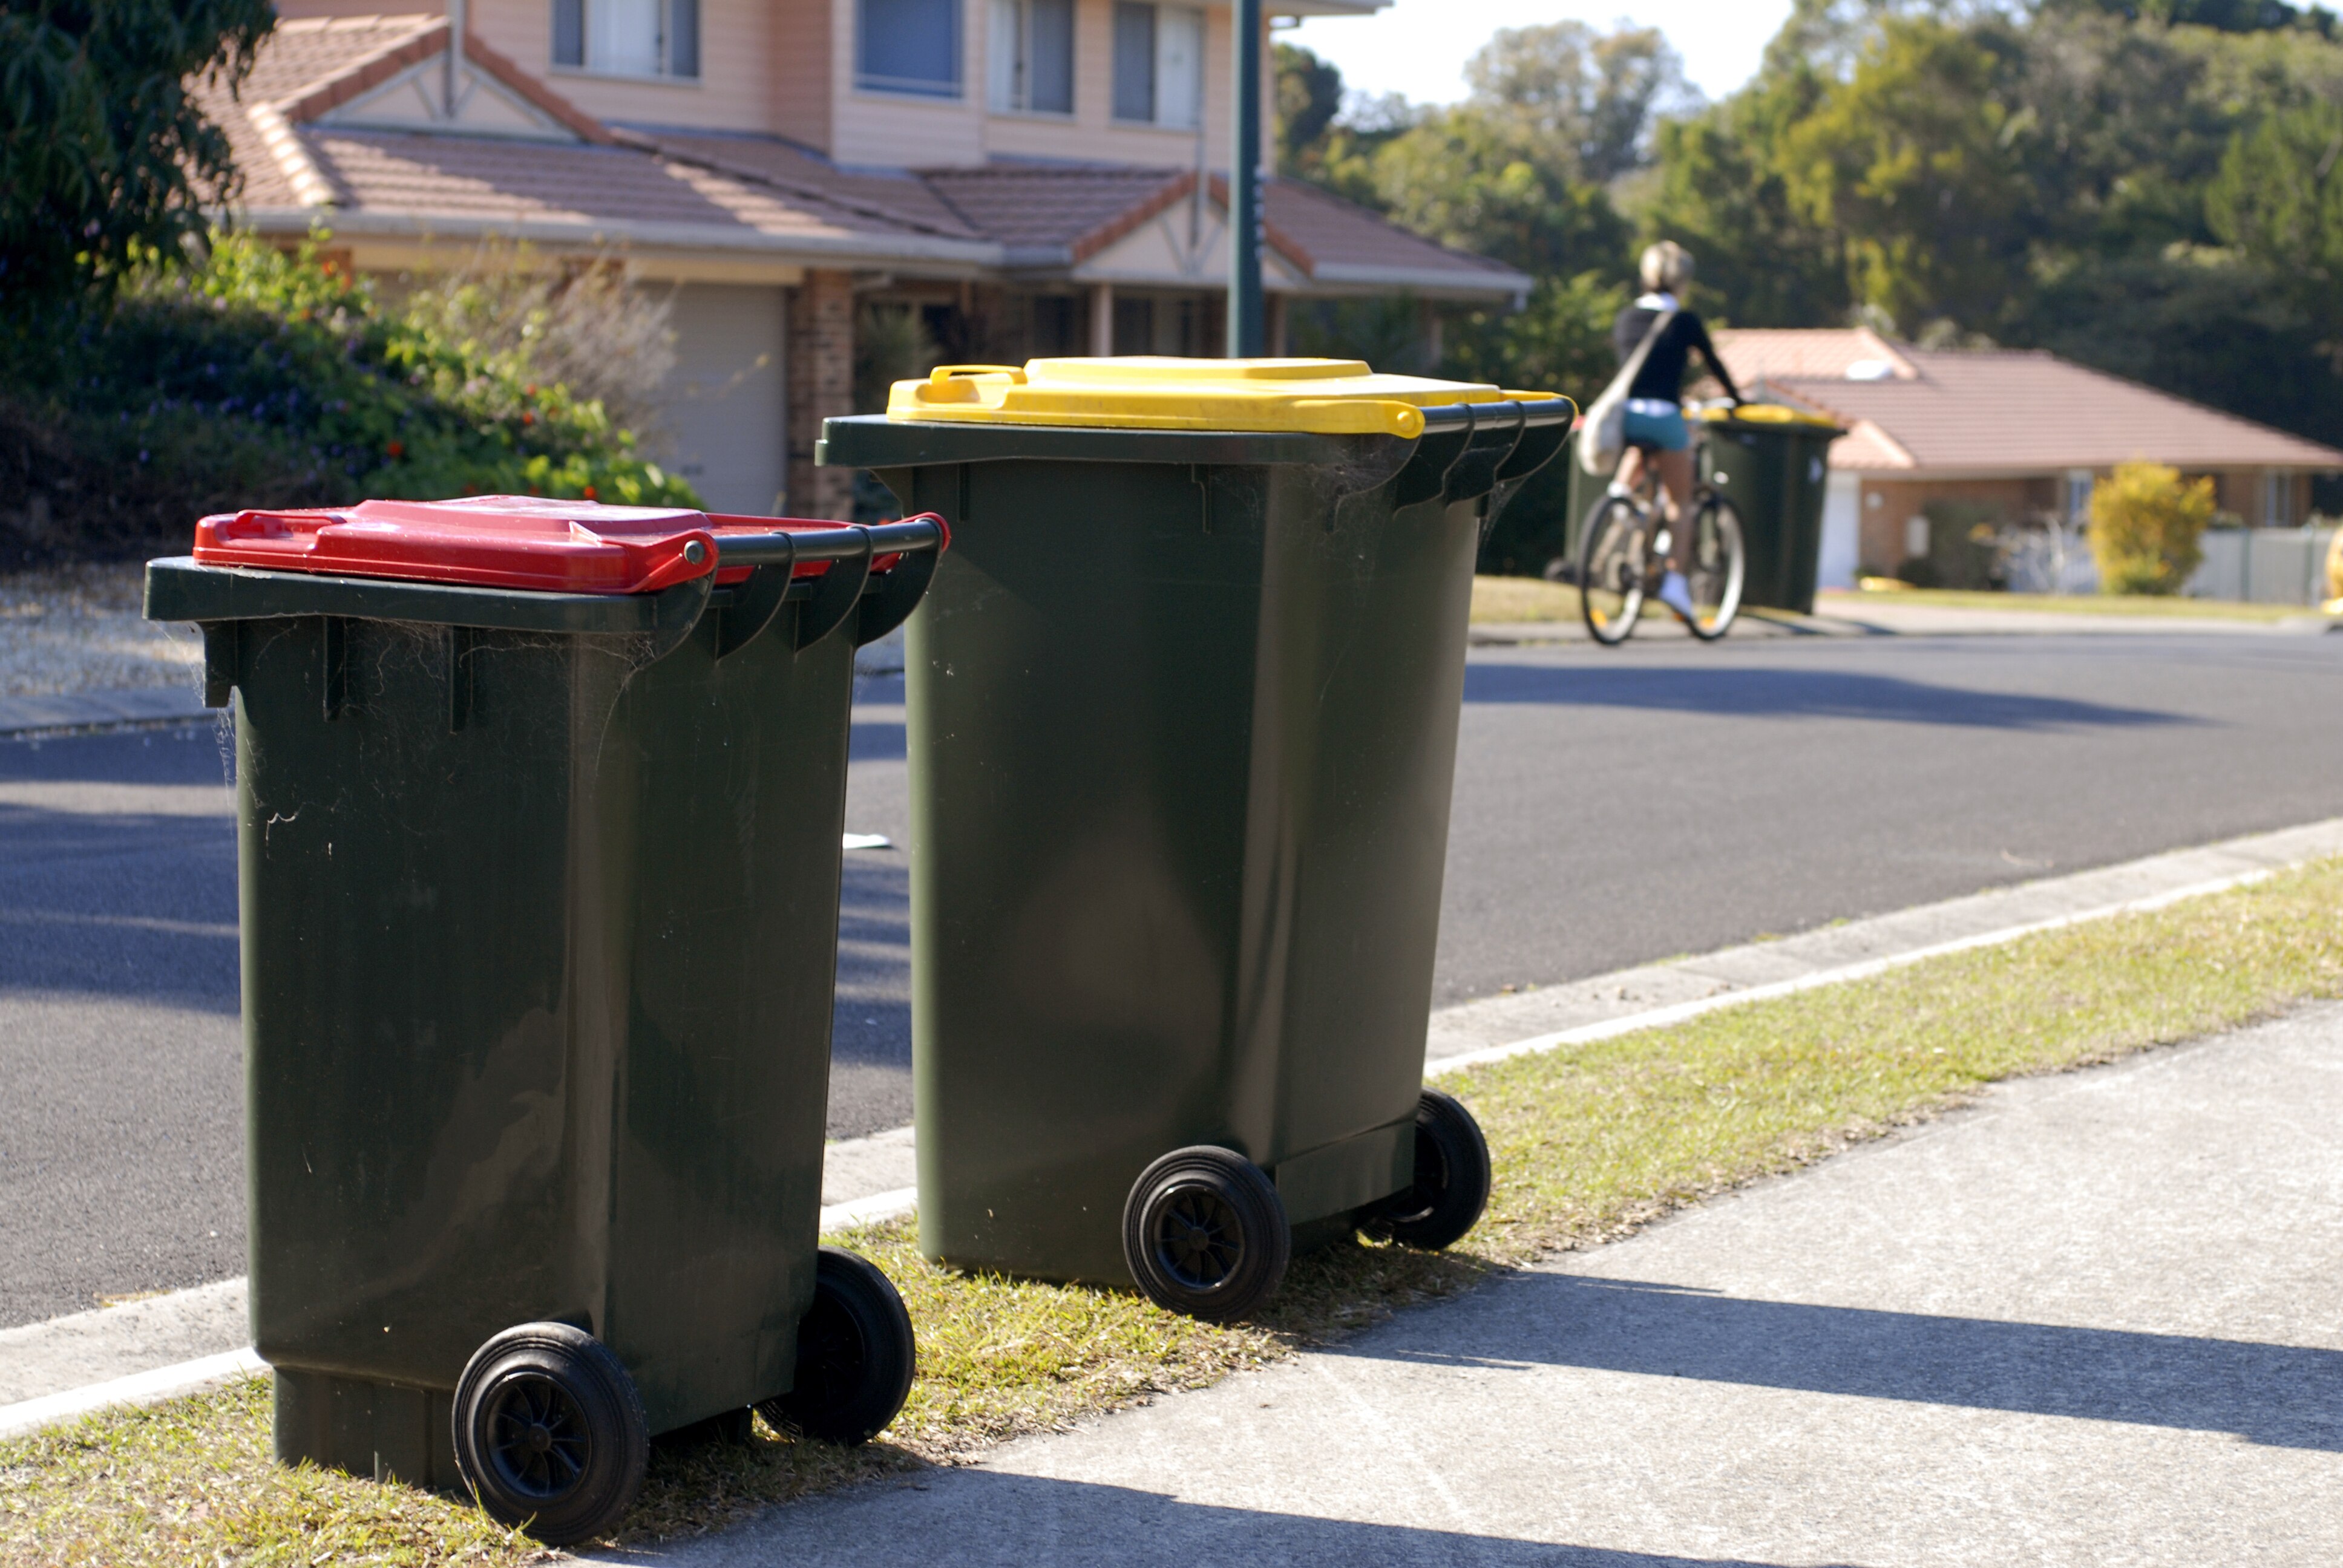 Household waste—do we dump or recycle?